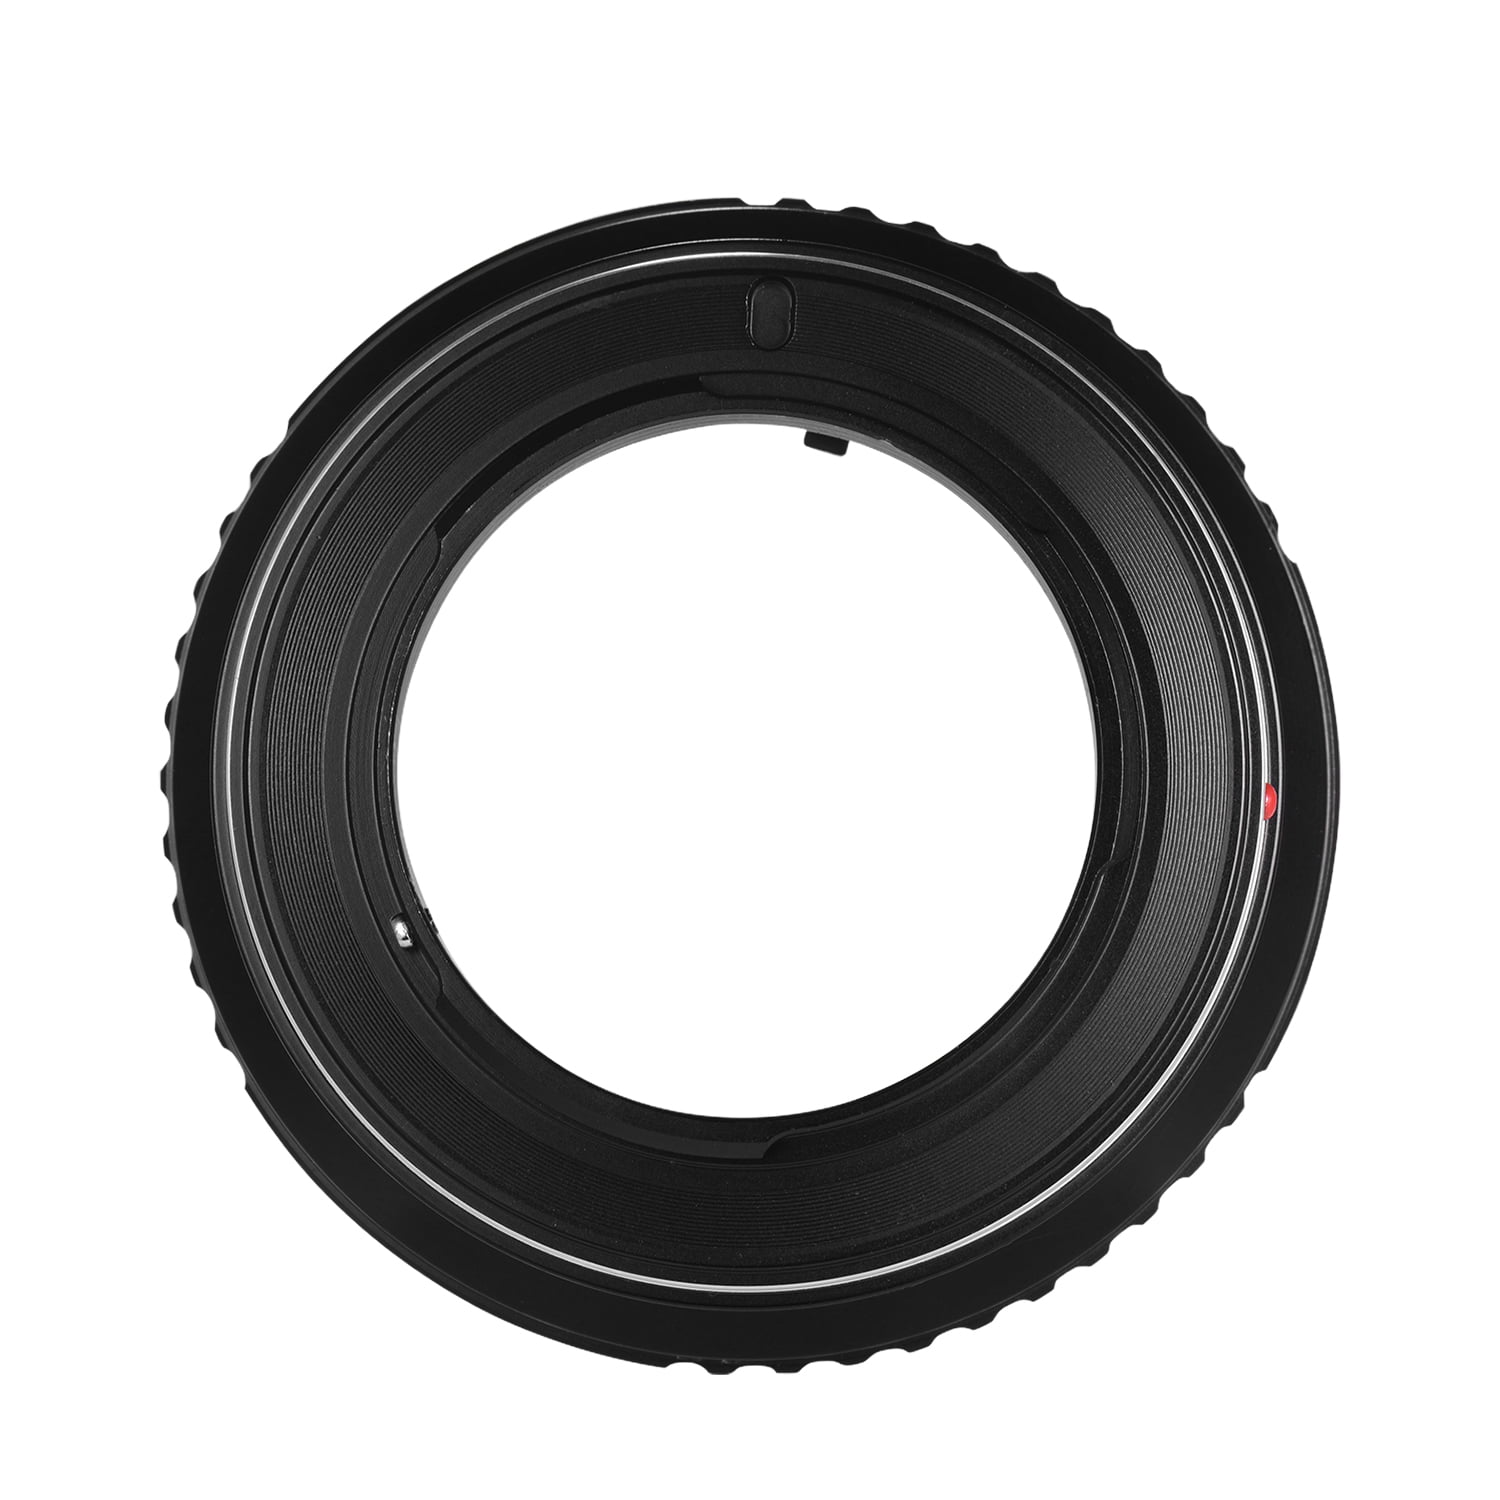 Fikaz OM-M4/3 Lens Mount Adapter Ring Aluminum Alloy Compatible with Olympus OM Mount Lens to Olympus Panasonic M4/3 Micro 4/3 Mount Mirrorless Cameras 